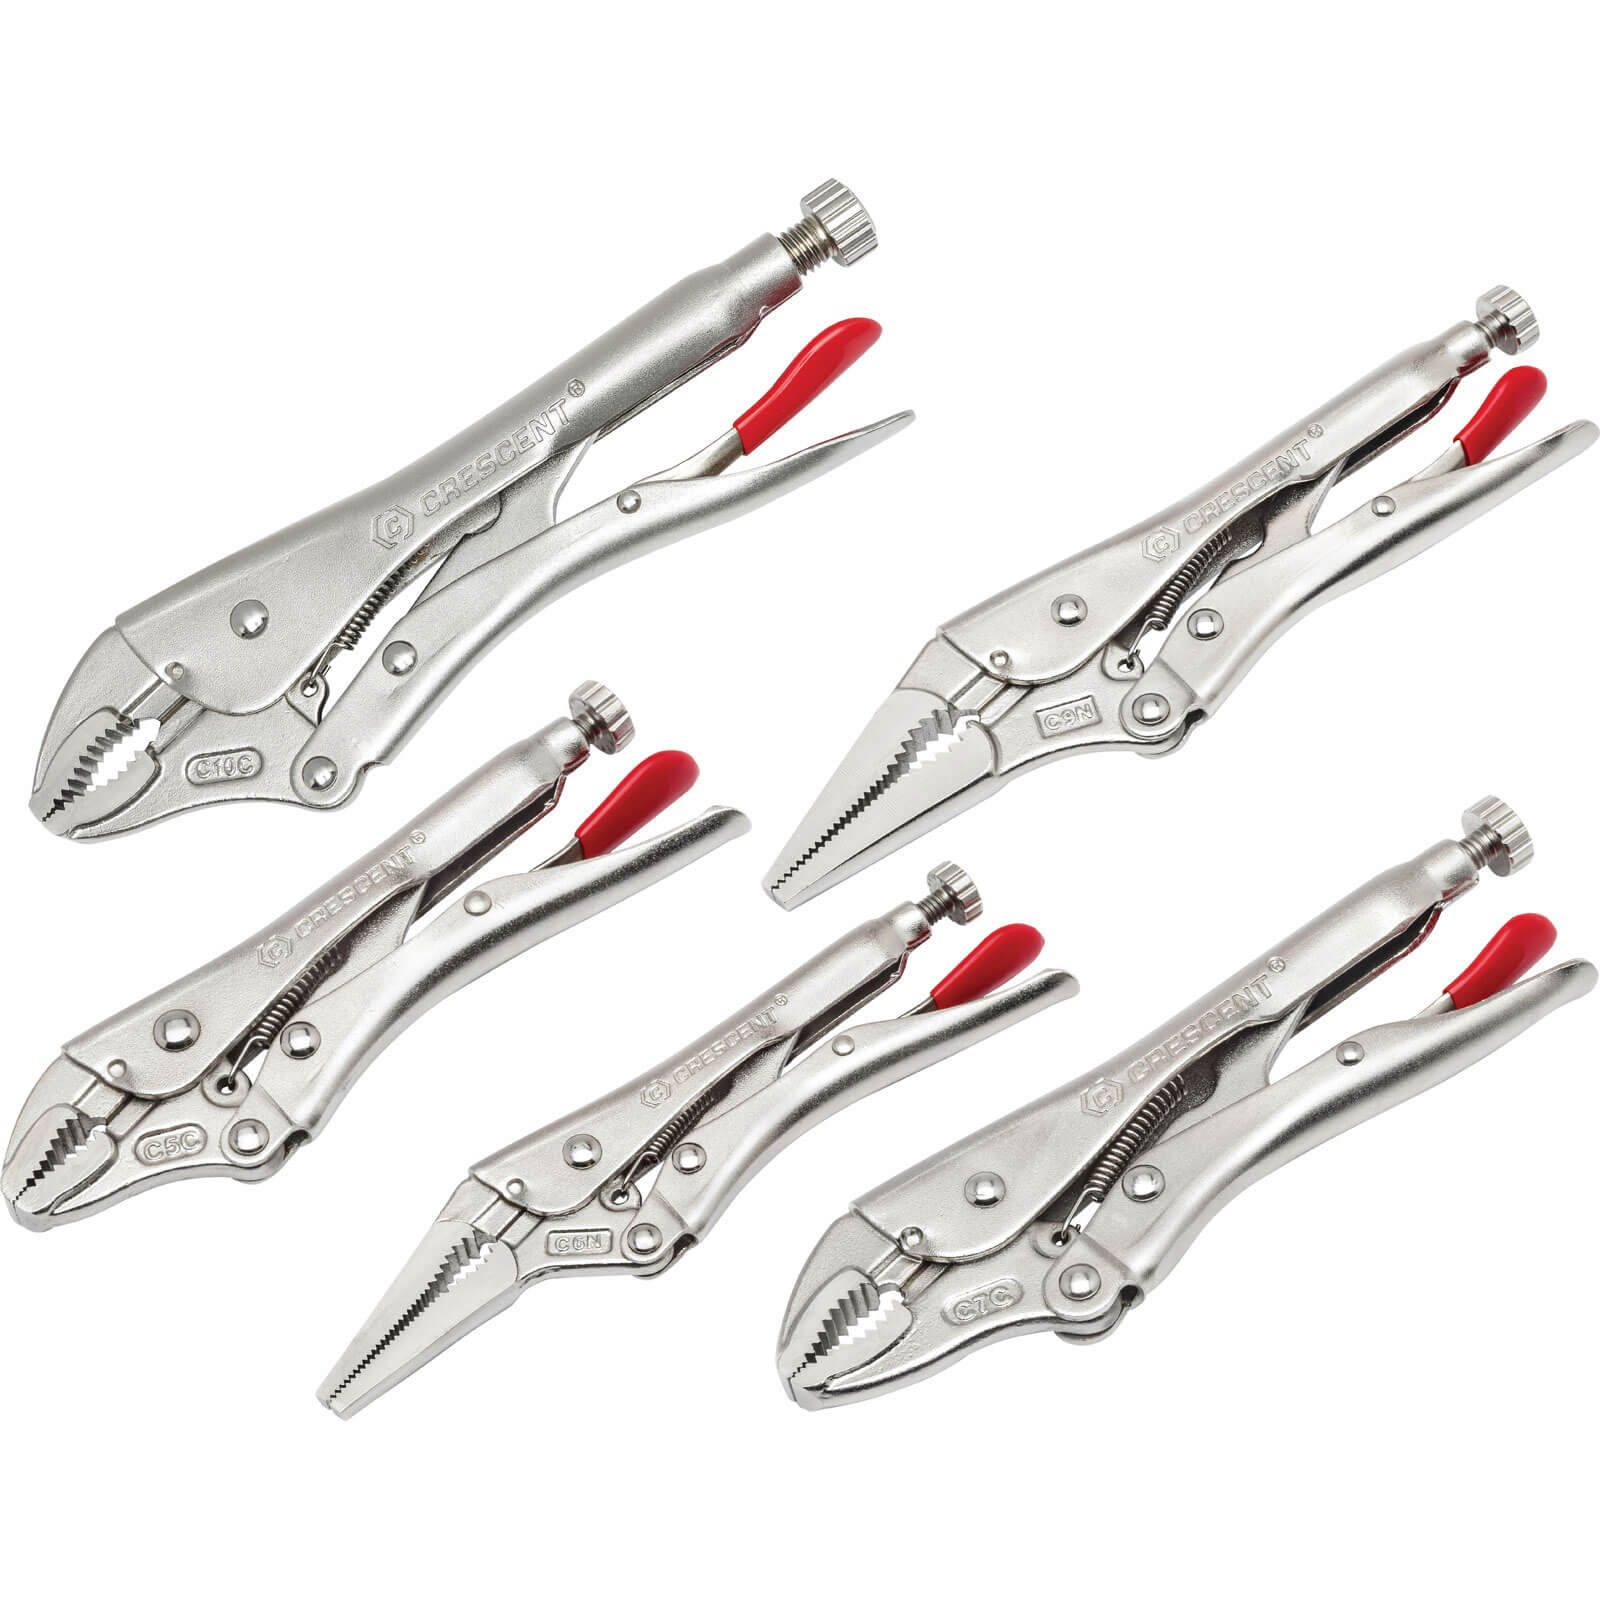 Photo of Crescent 5 Piece Locking Pliers With Wire Cutter Set